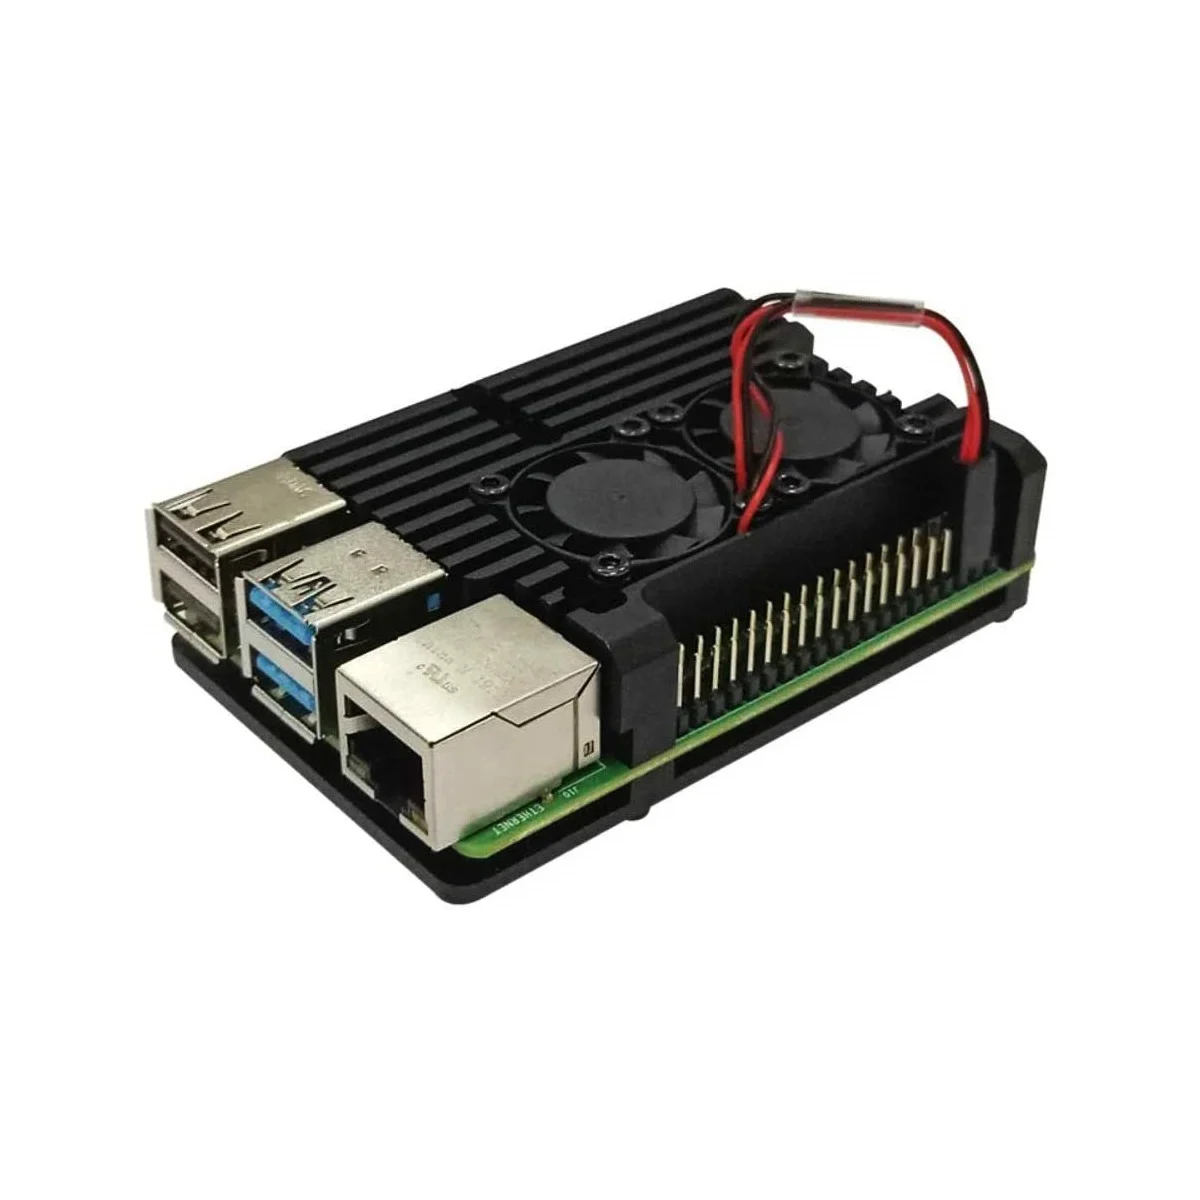 Acrylic Case for Raspberry PI 4 Model B with Cooling Fan Slot